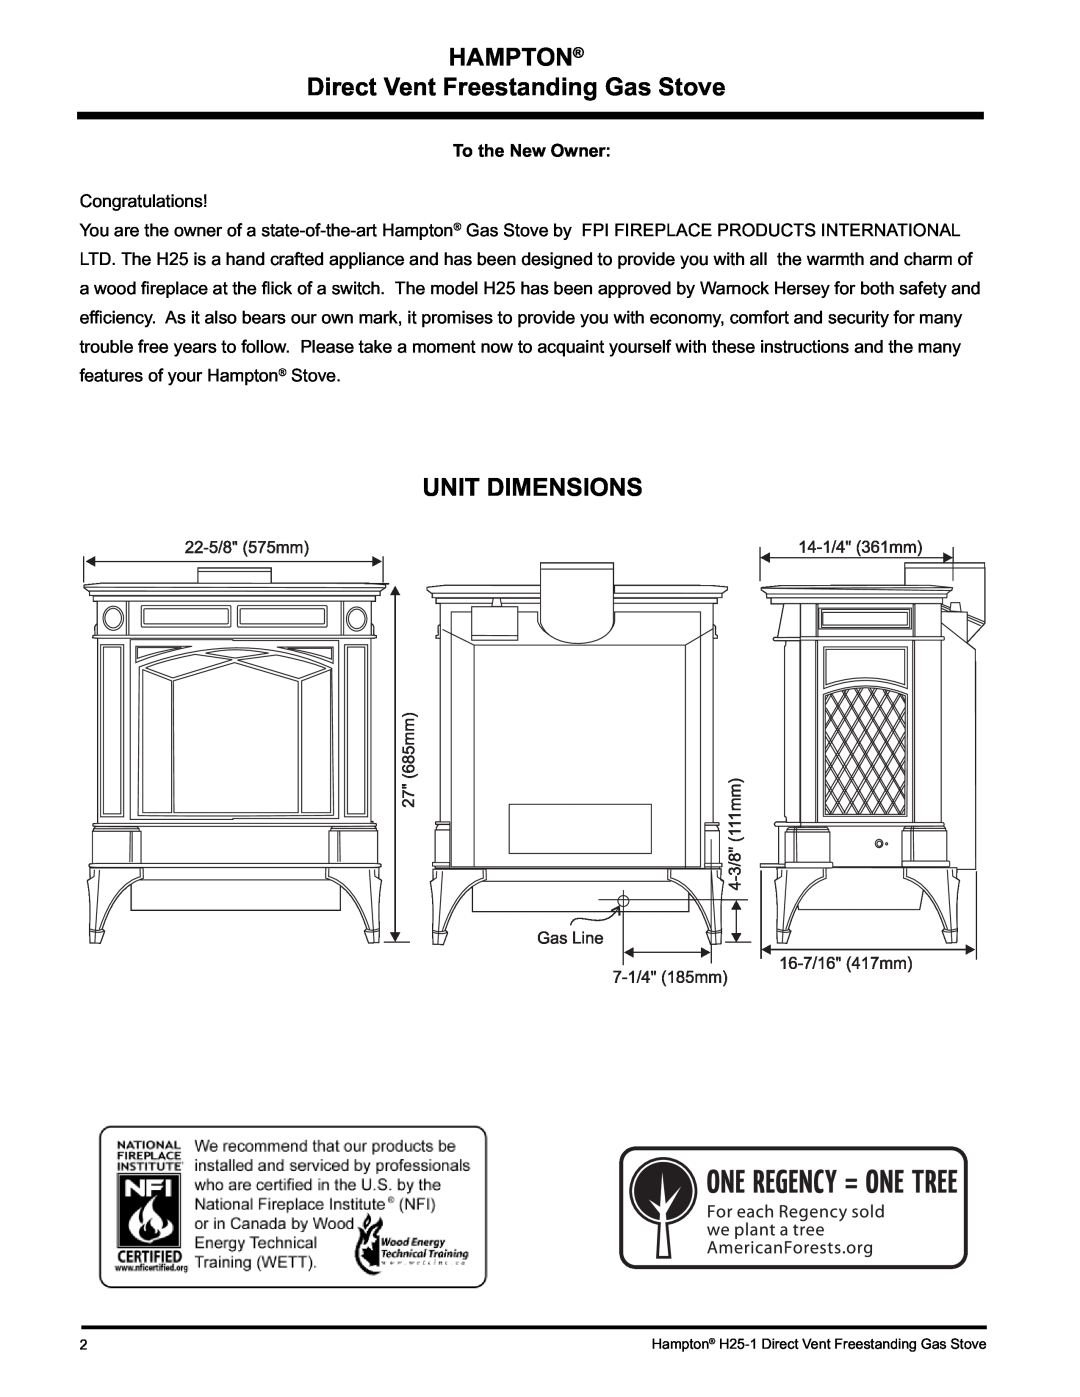 Hampton Direct H25-NG1, H25-LP1 HAMPTON Direct Vent Freestanding Gas Stove, Unit Dimensions, To the New Owner 